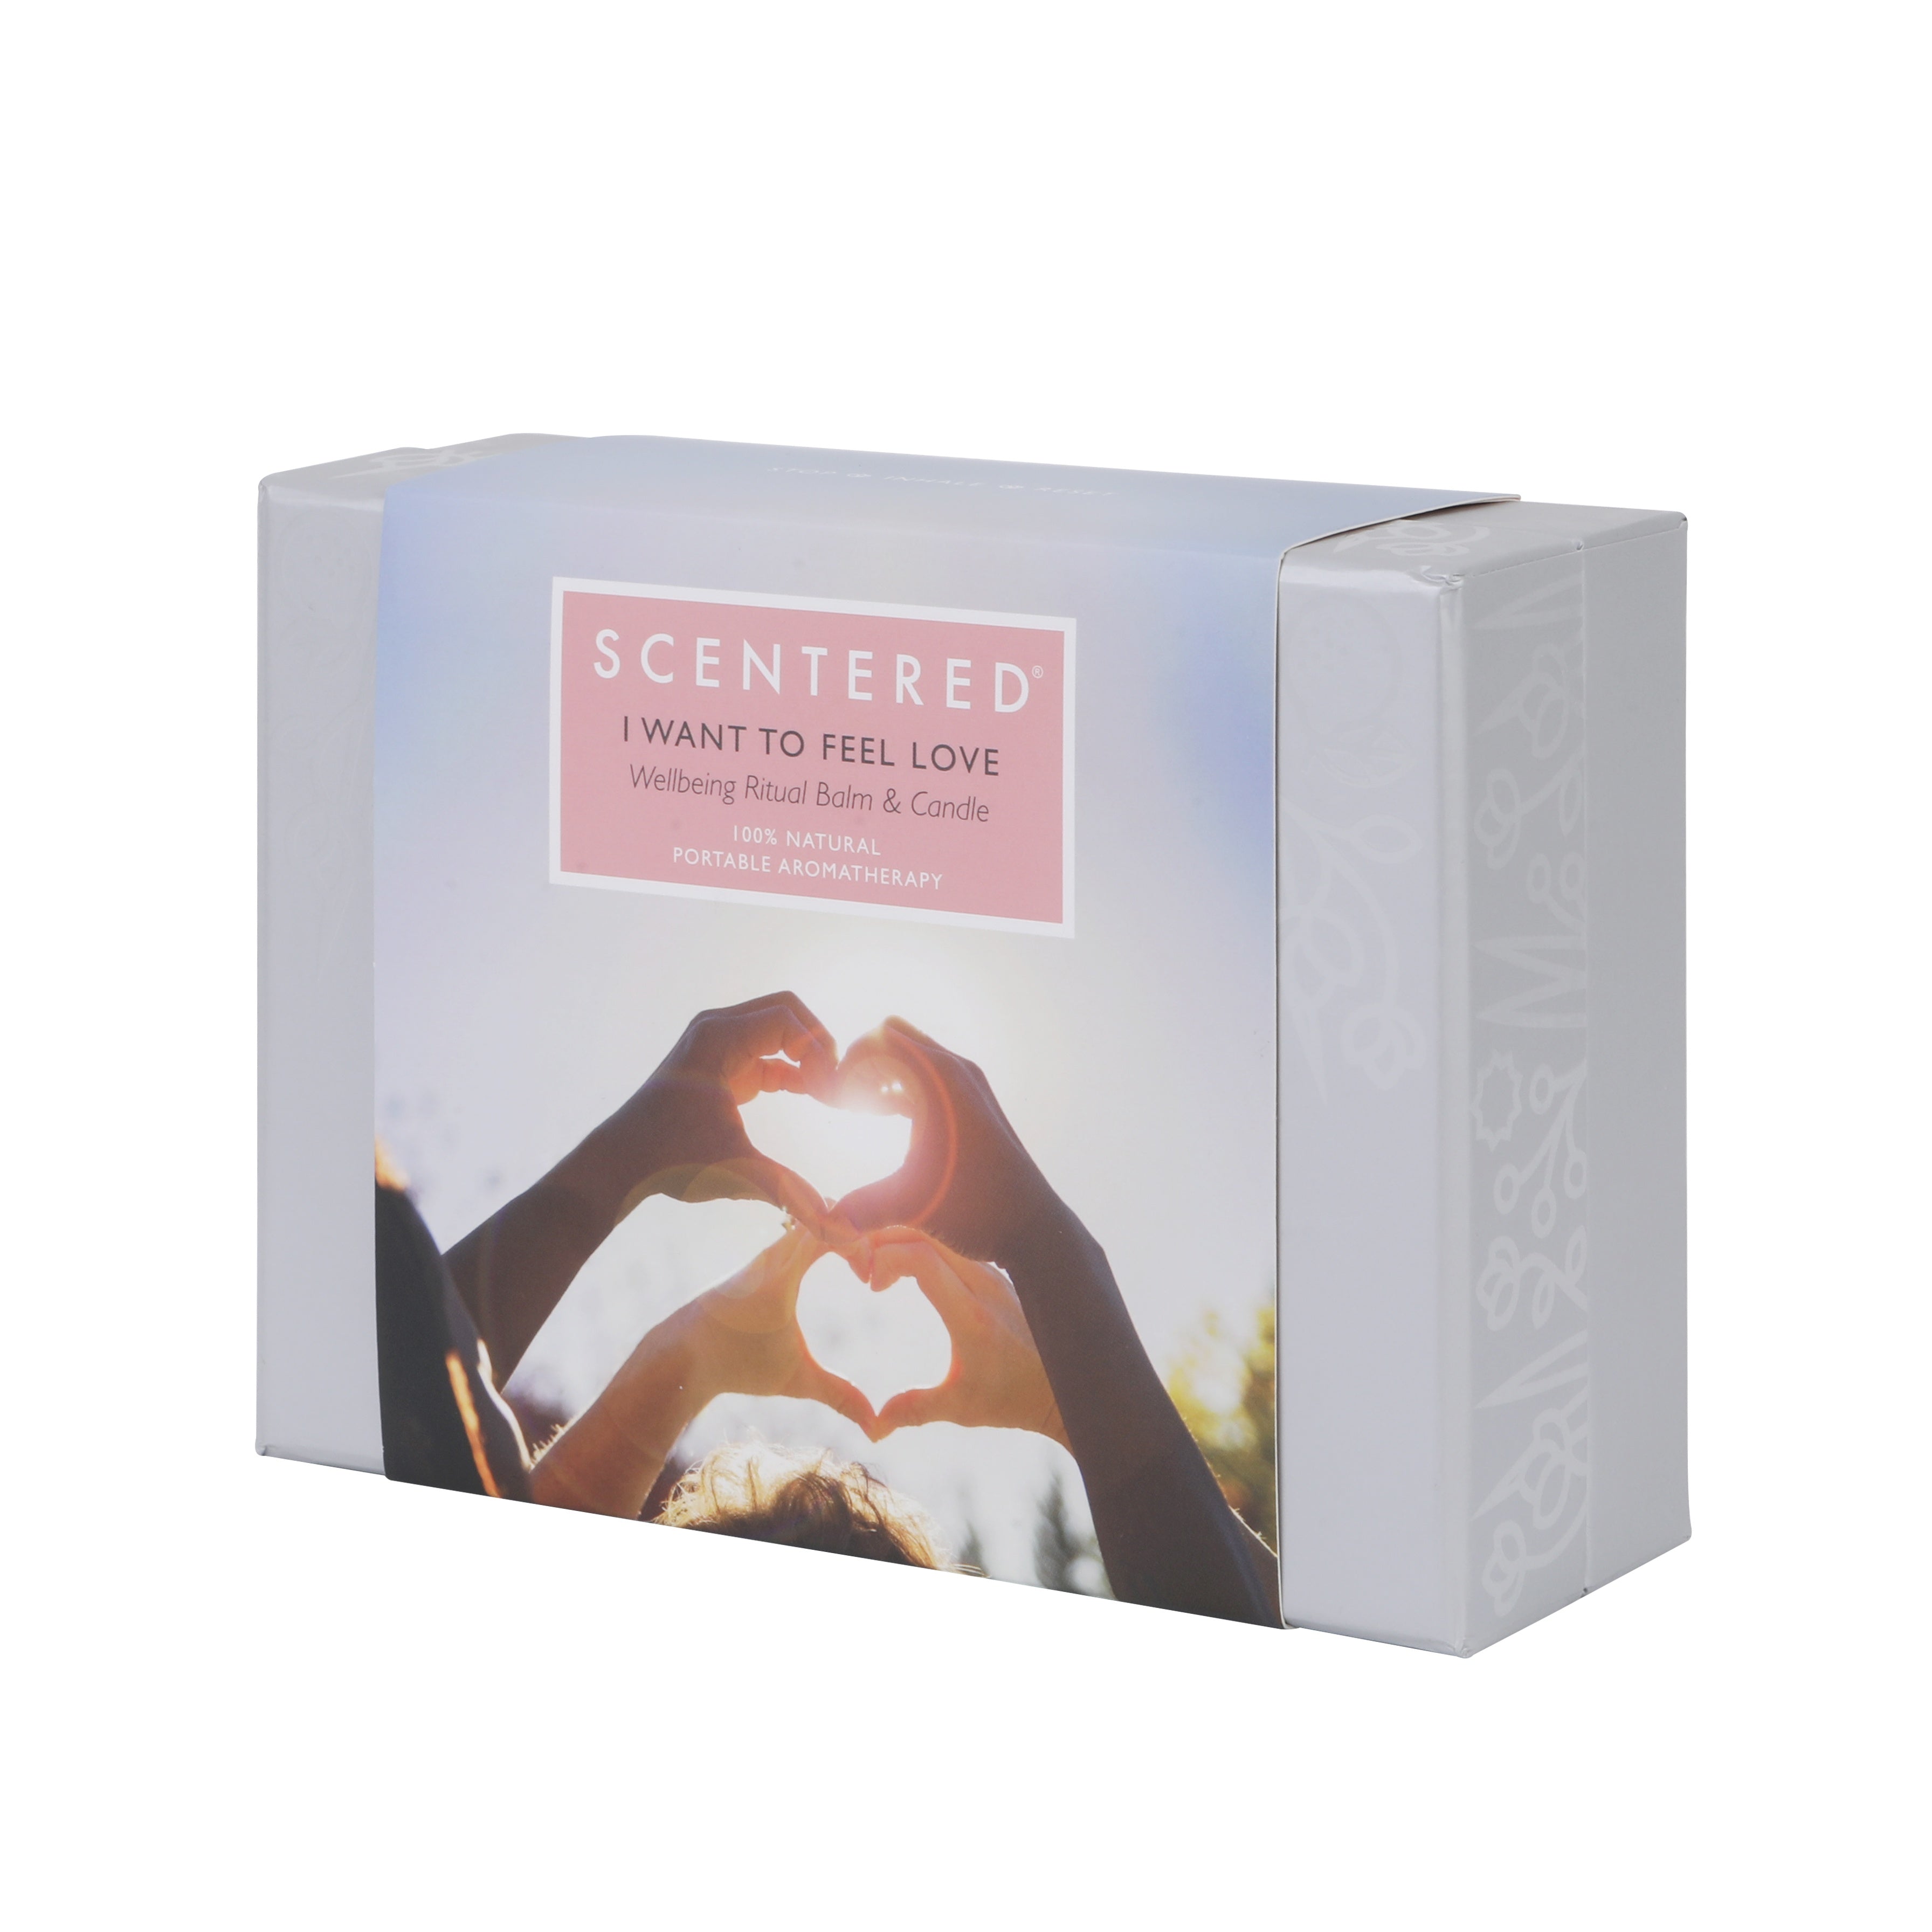 Scentered Aromatherapy Candle and Balm Love Blend Gift set view of outer gift box